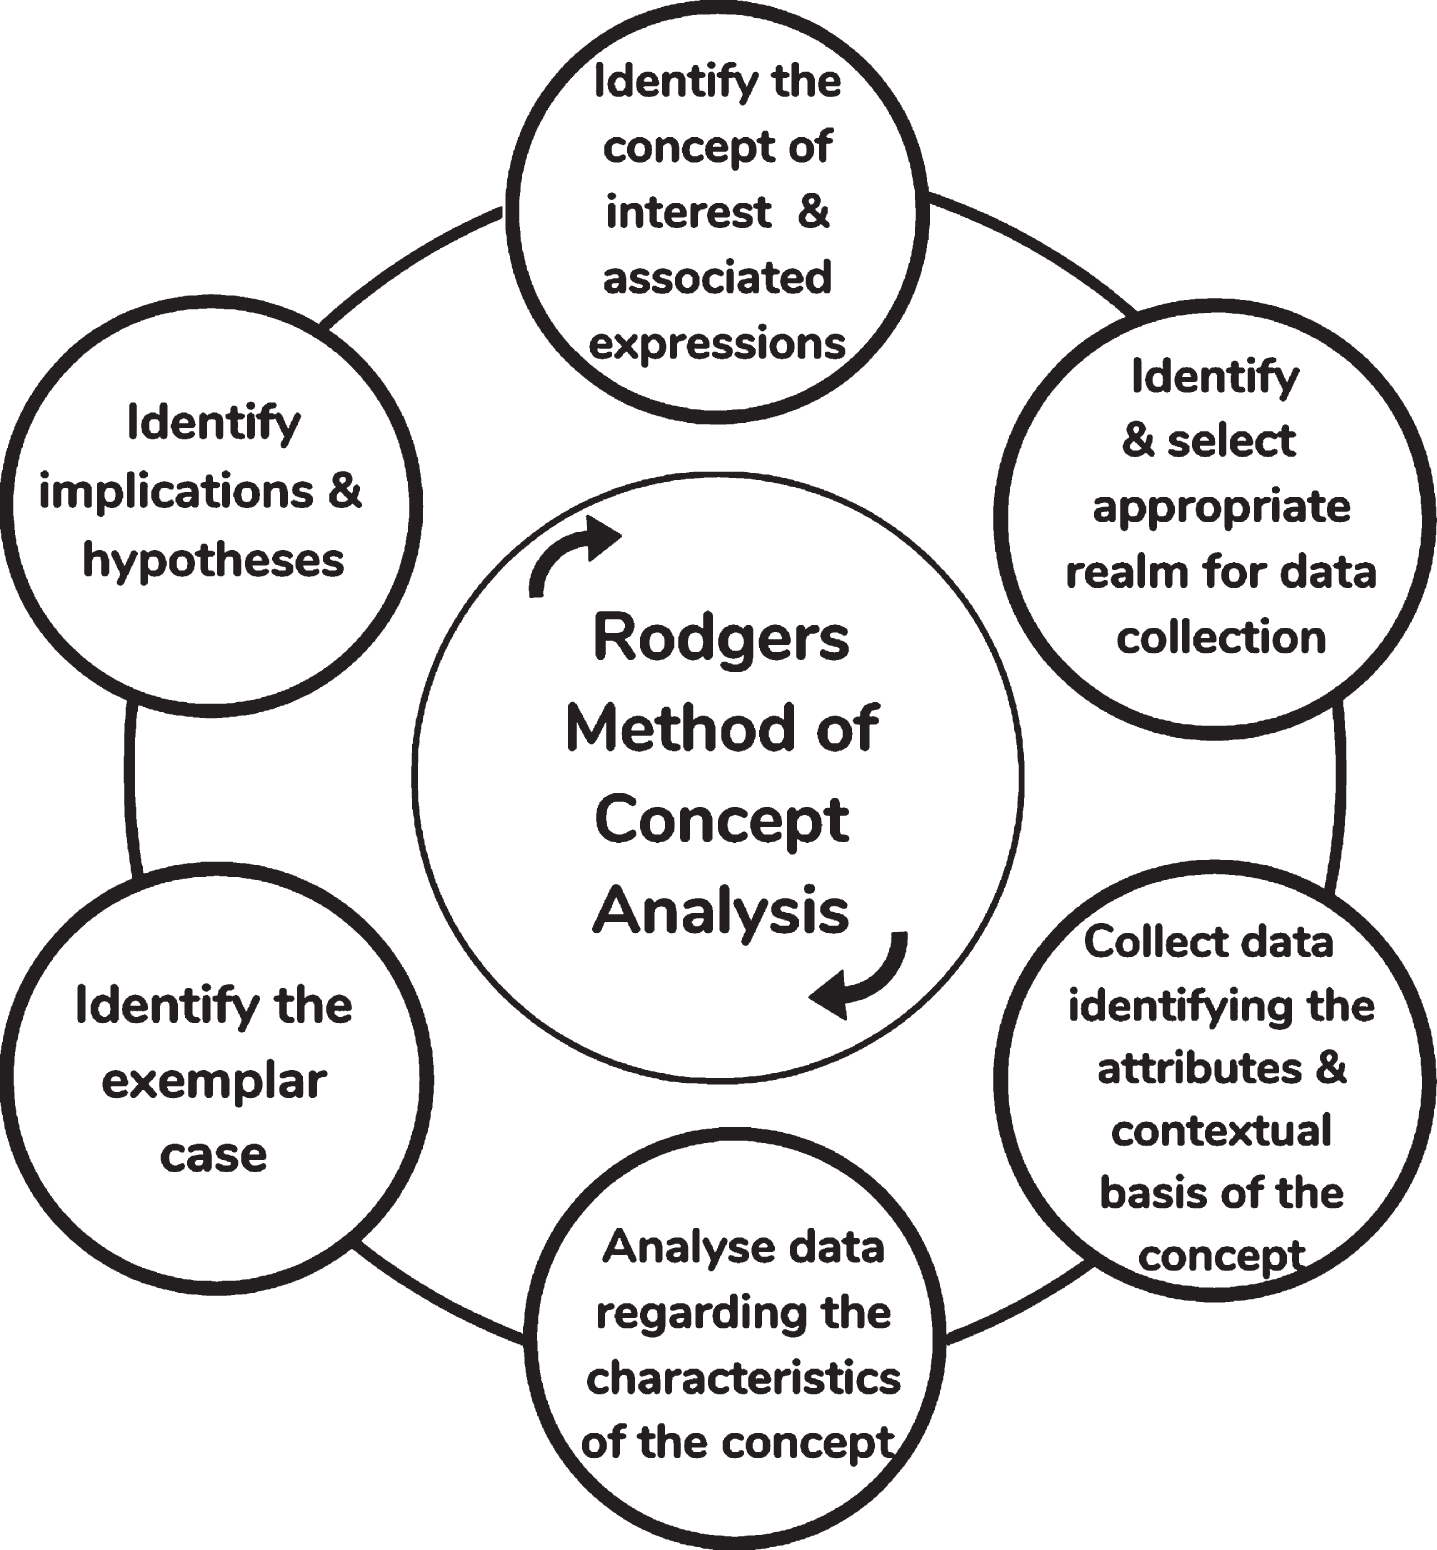 The cyclical process of a Rodgerian concept analysis.